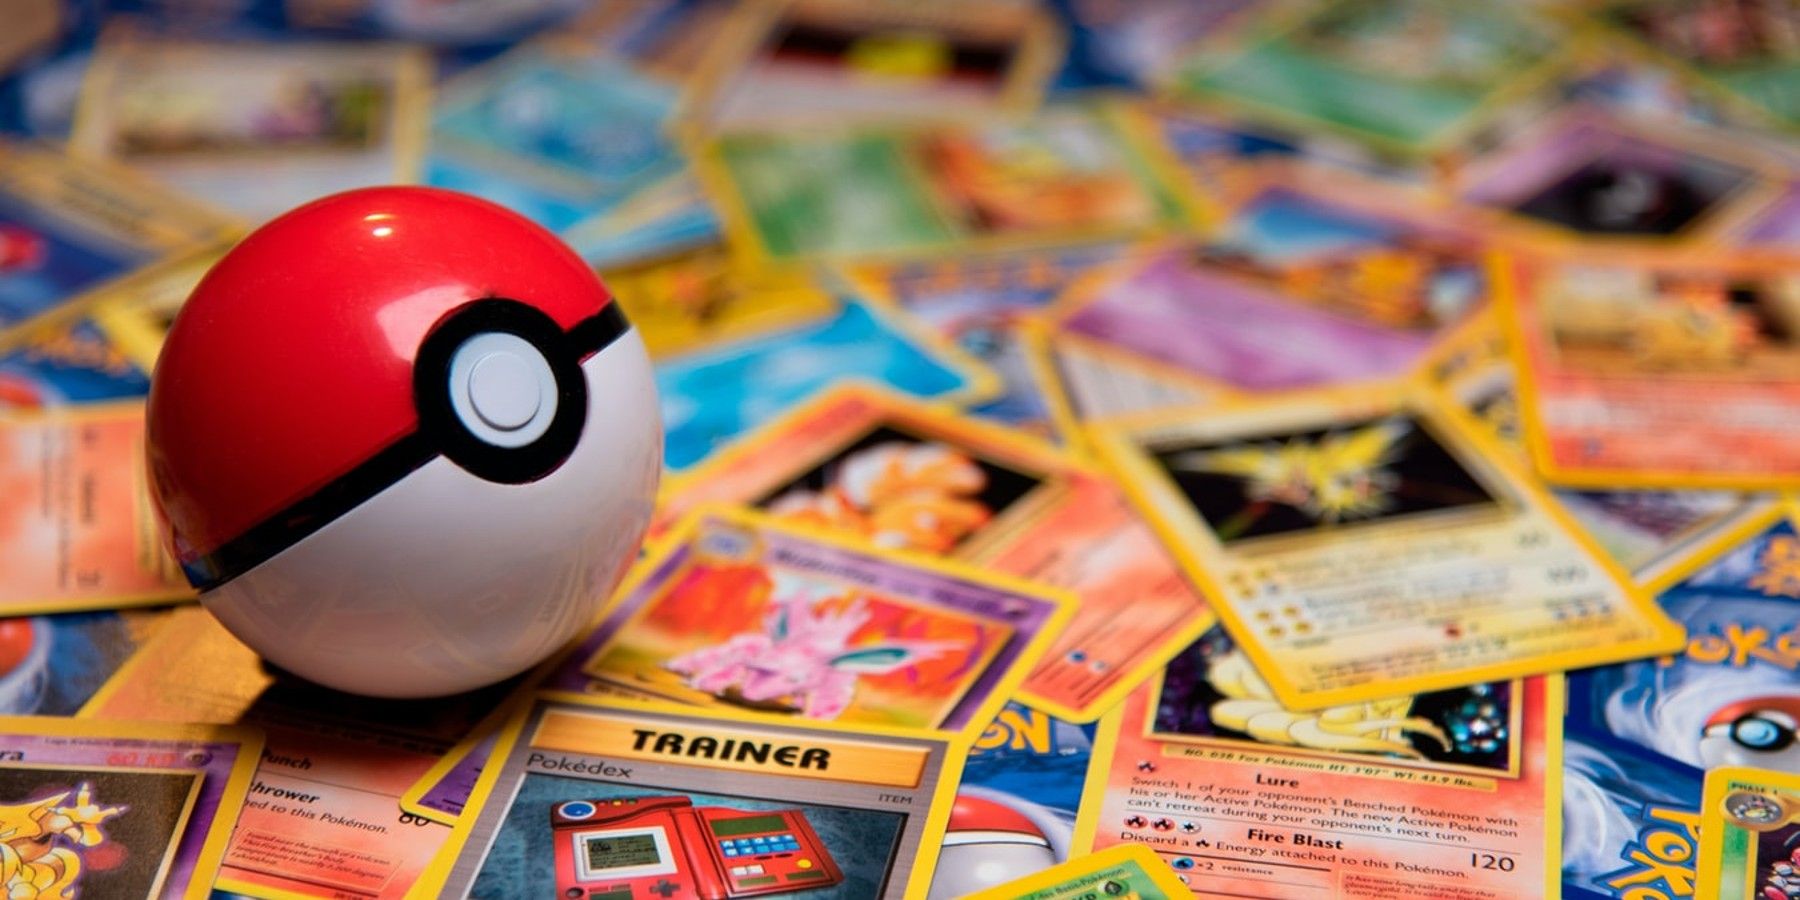 California Man Accused of Stealing Thousands of Dollars Worth of Pokemon Cards